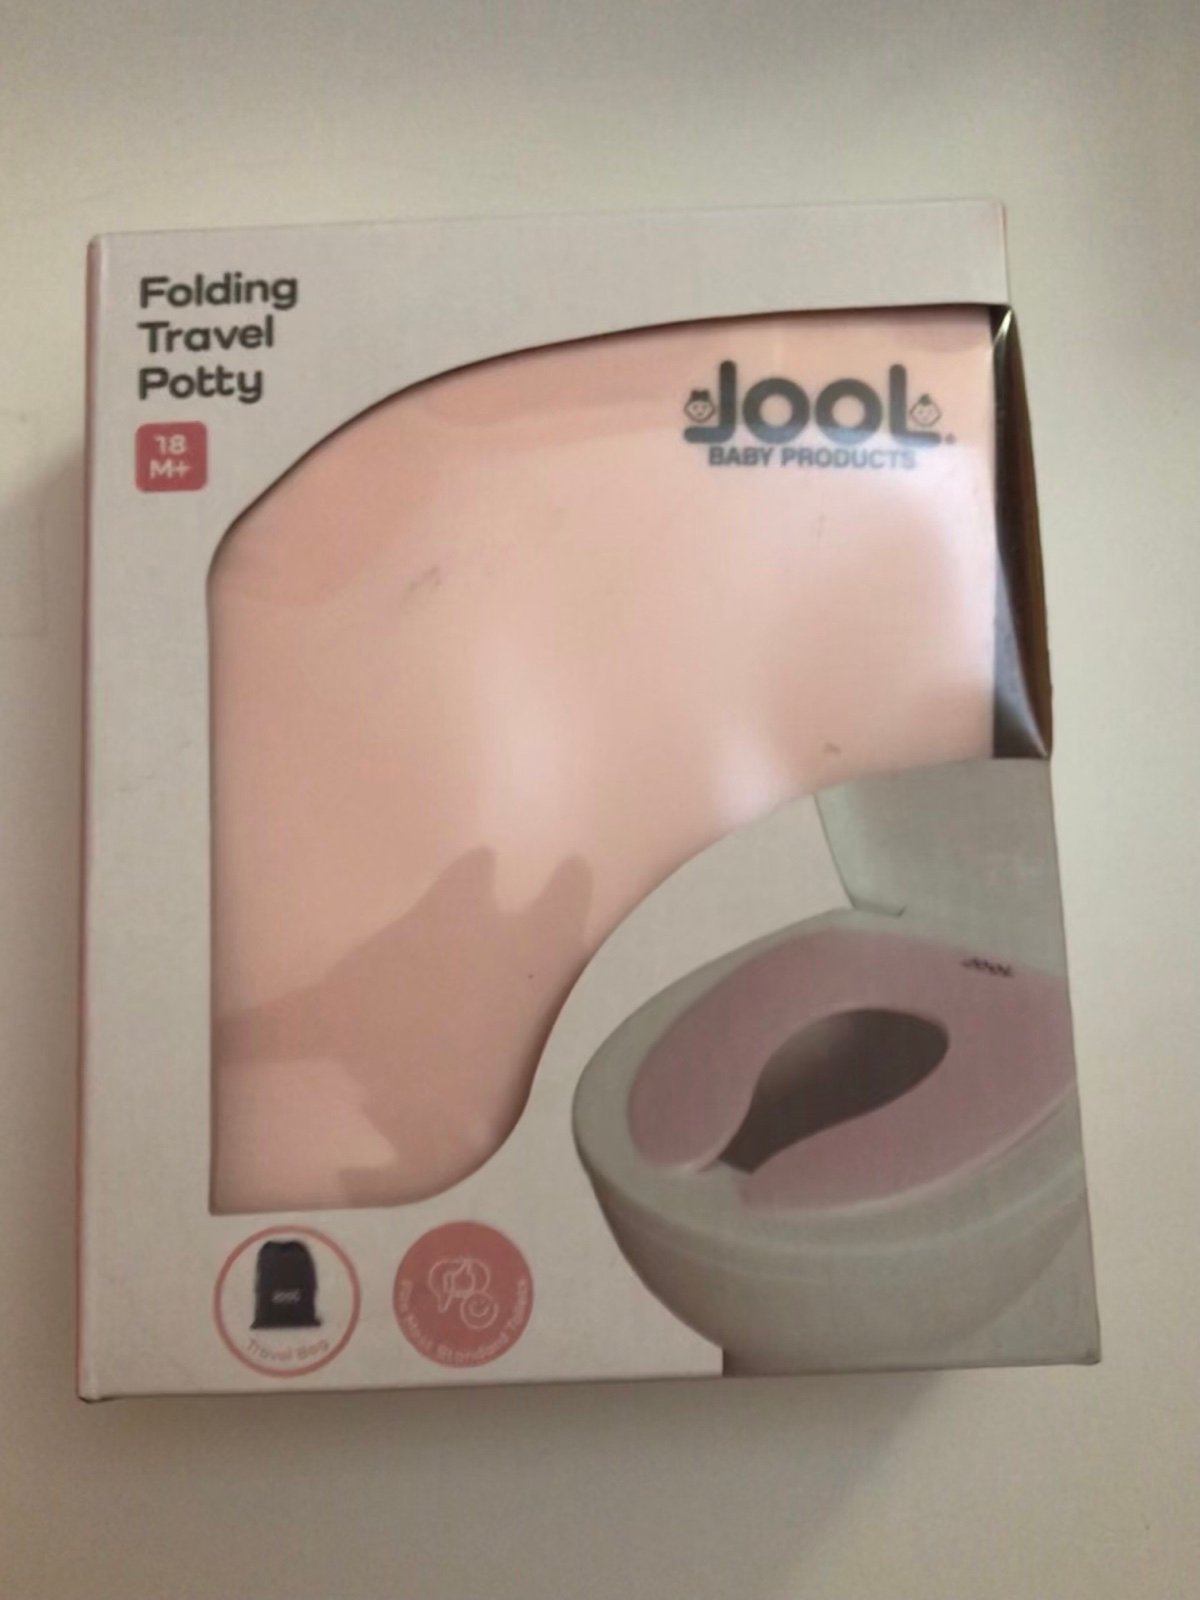 Folding travel potty pink Jool Baby Products new in package AuDhdPq05